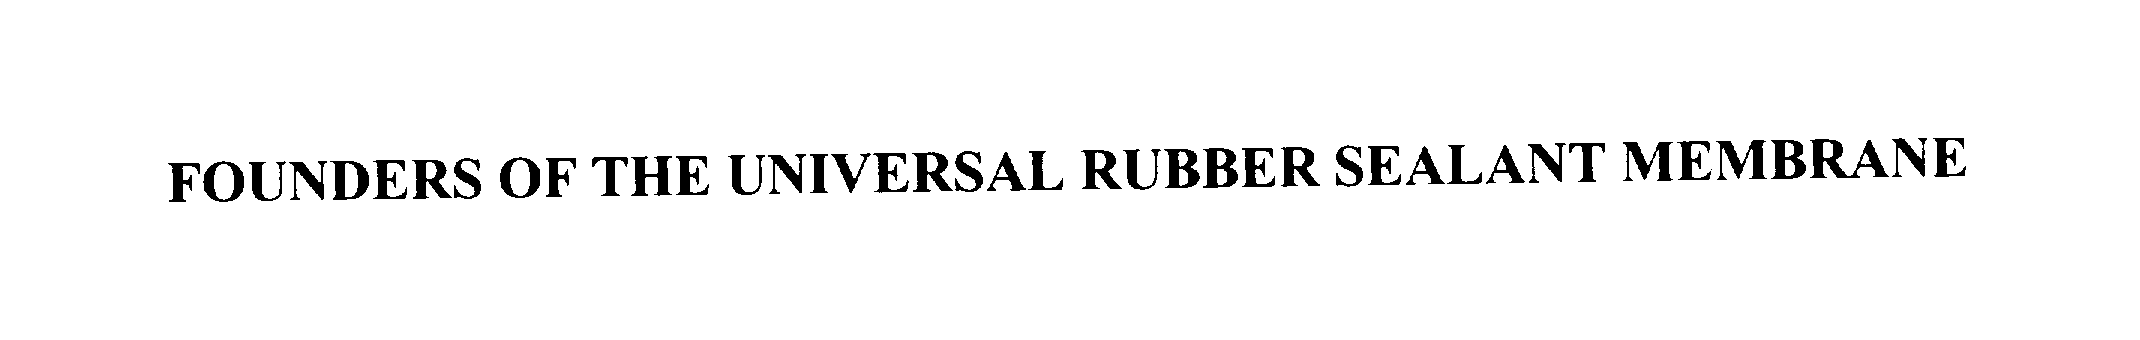  FOUNDERS OF THE UNIVERSAL RUBBER SEALANT MEMBRANE